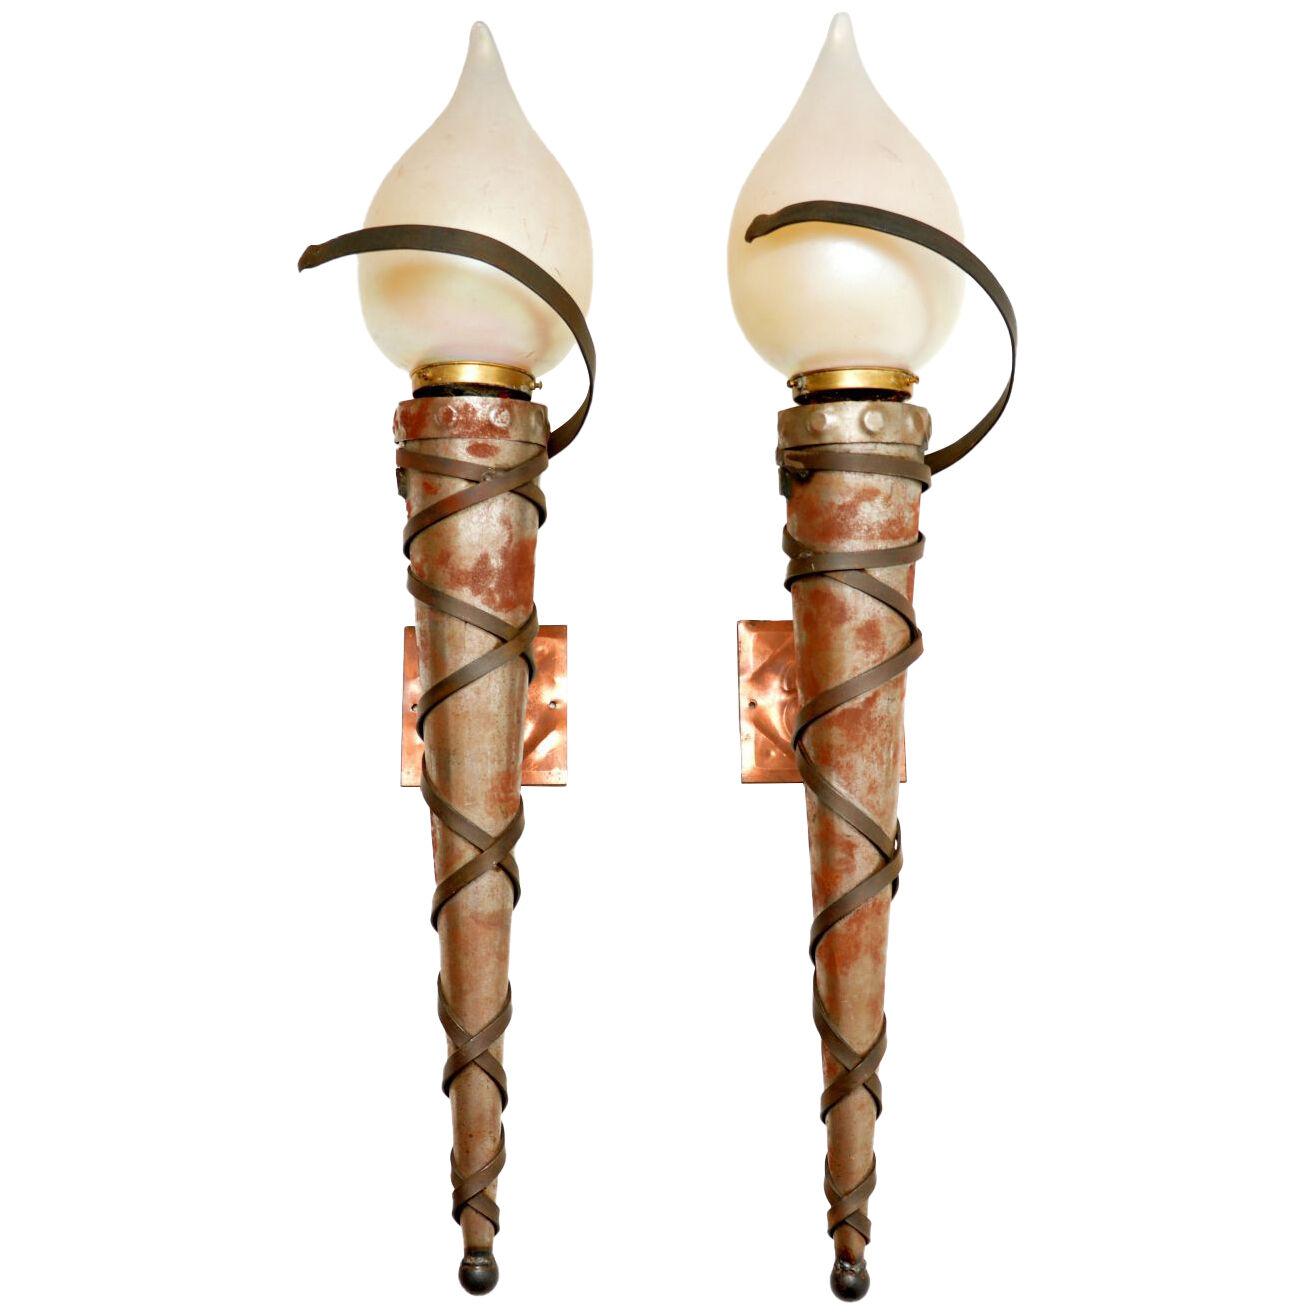 Pair of Art Deco Steel, Copper and Glass Wall Sconce Lamps